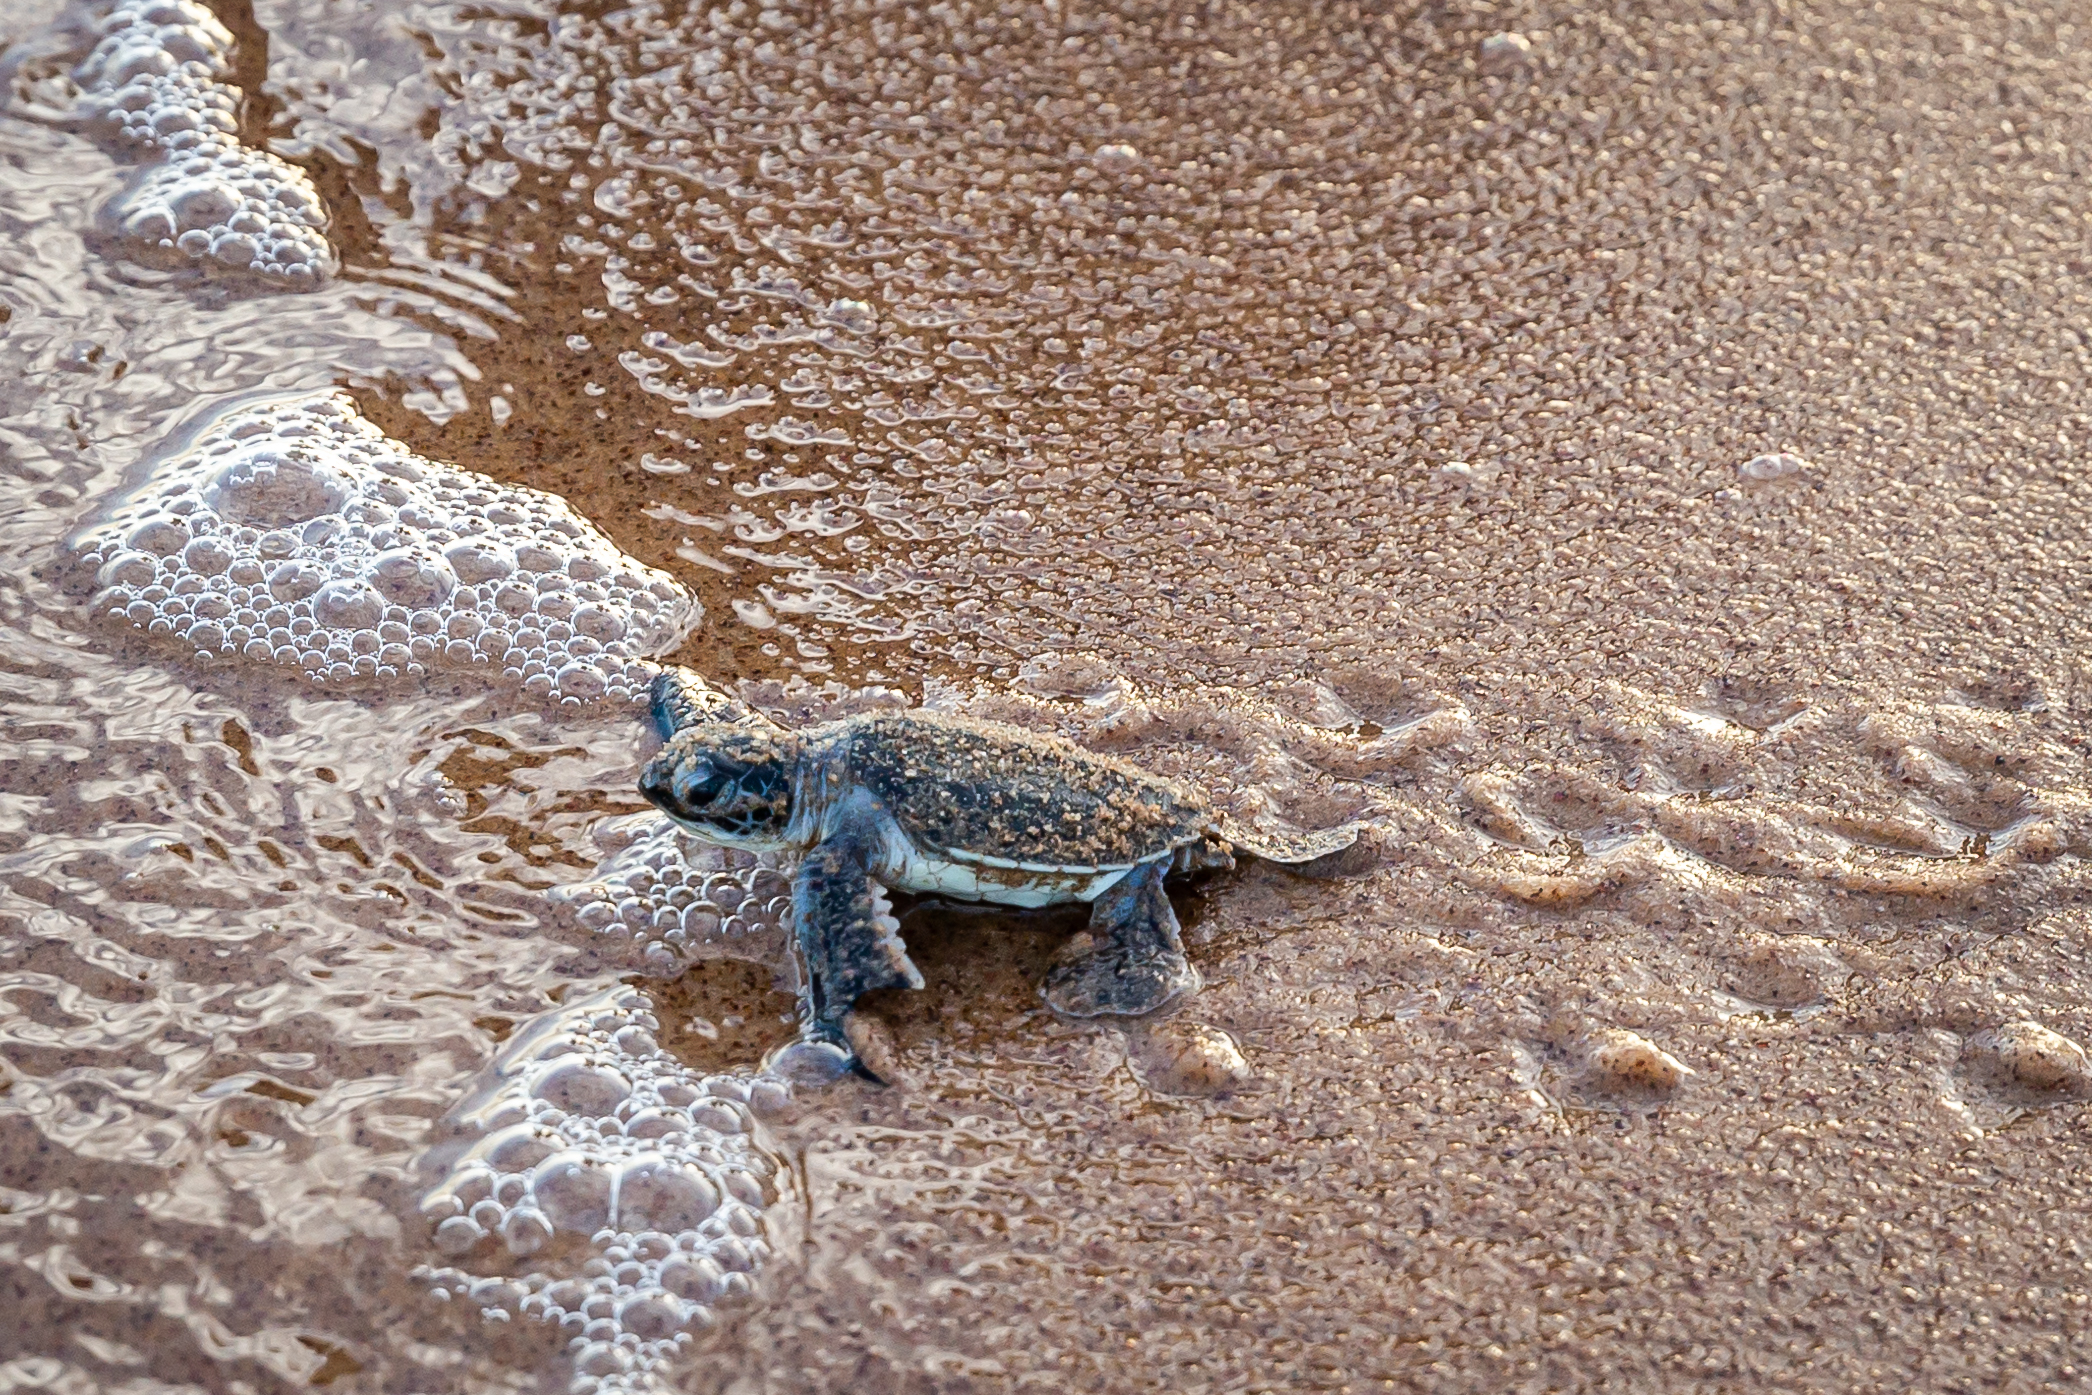 A baby leatherback sea turtle walking across the sand towards the ocean